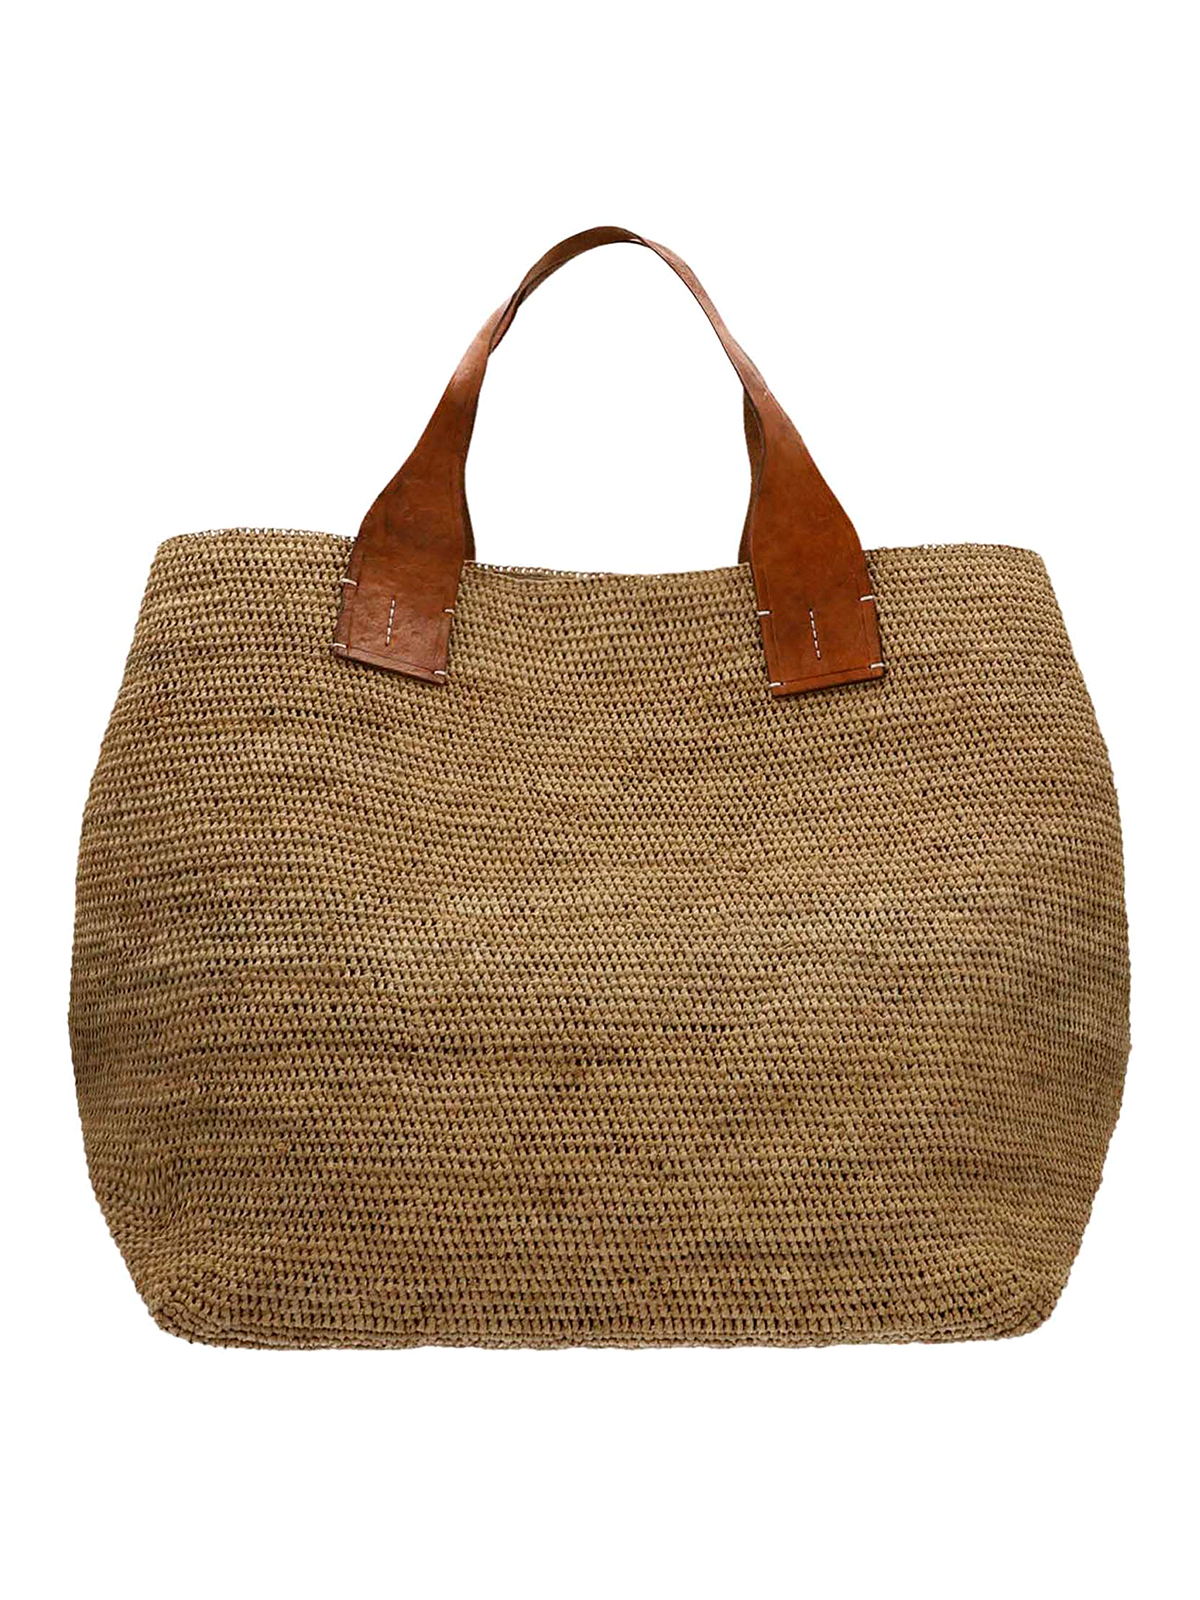 Ibeliv Rio Shopping Bag In Beige